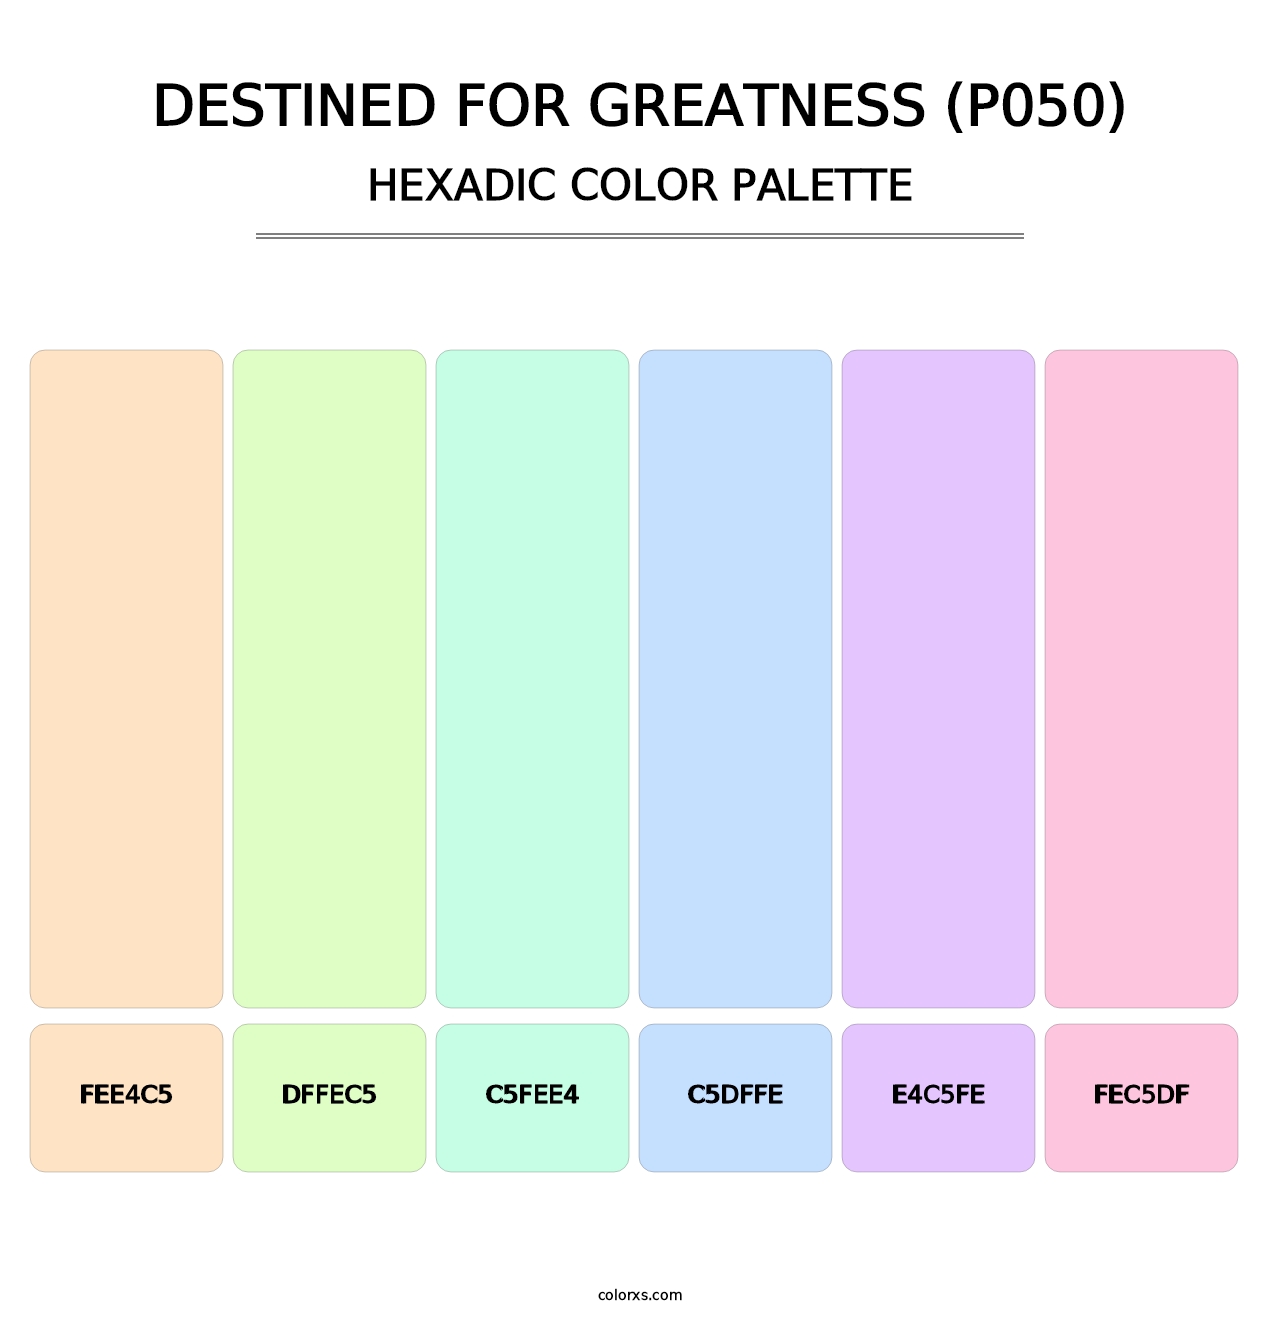 Destined for Greatness (P050) - Hexadic Color Palette